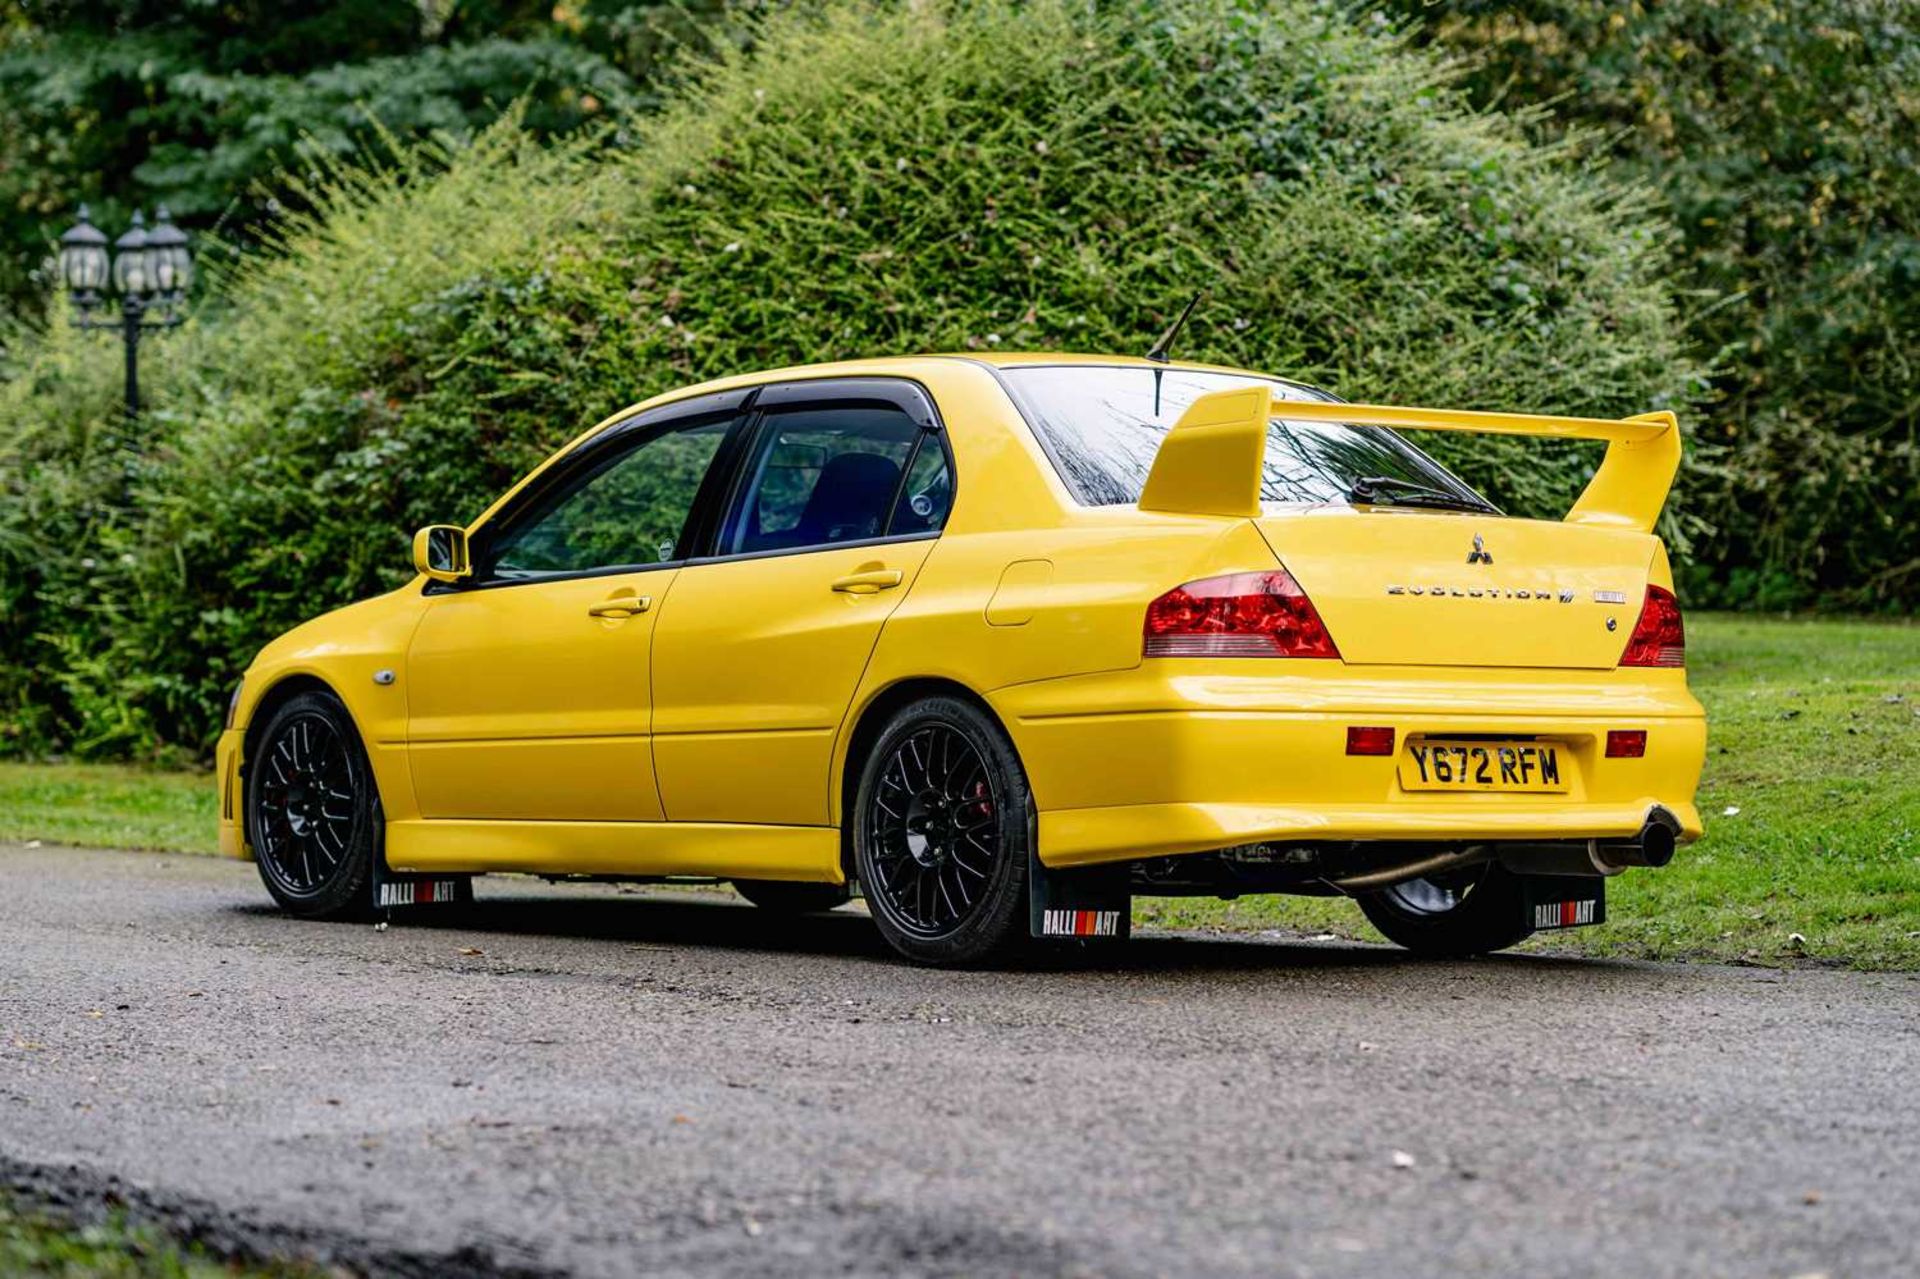 2001 Mitsubishi Lancer Evolution VII Subtly upgraded and previous long-term (seventeen year) ownersh - Image 8 of 64